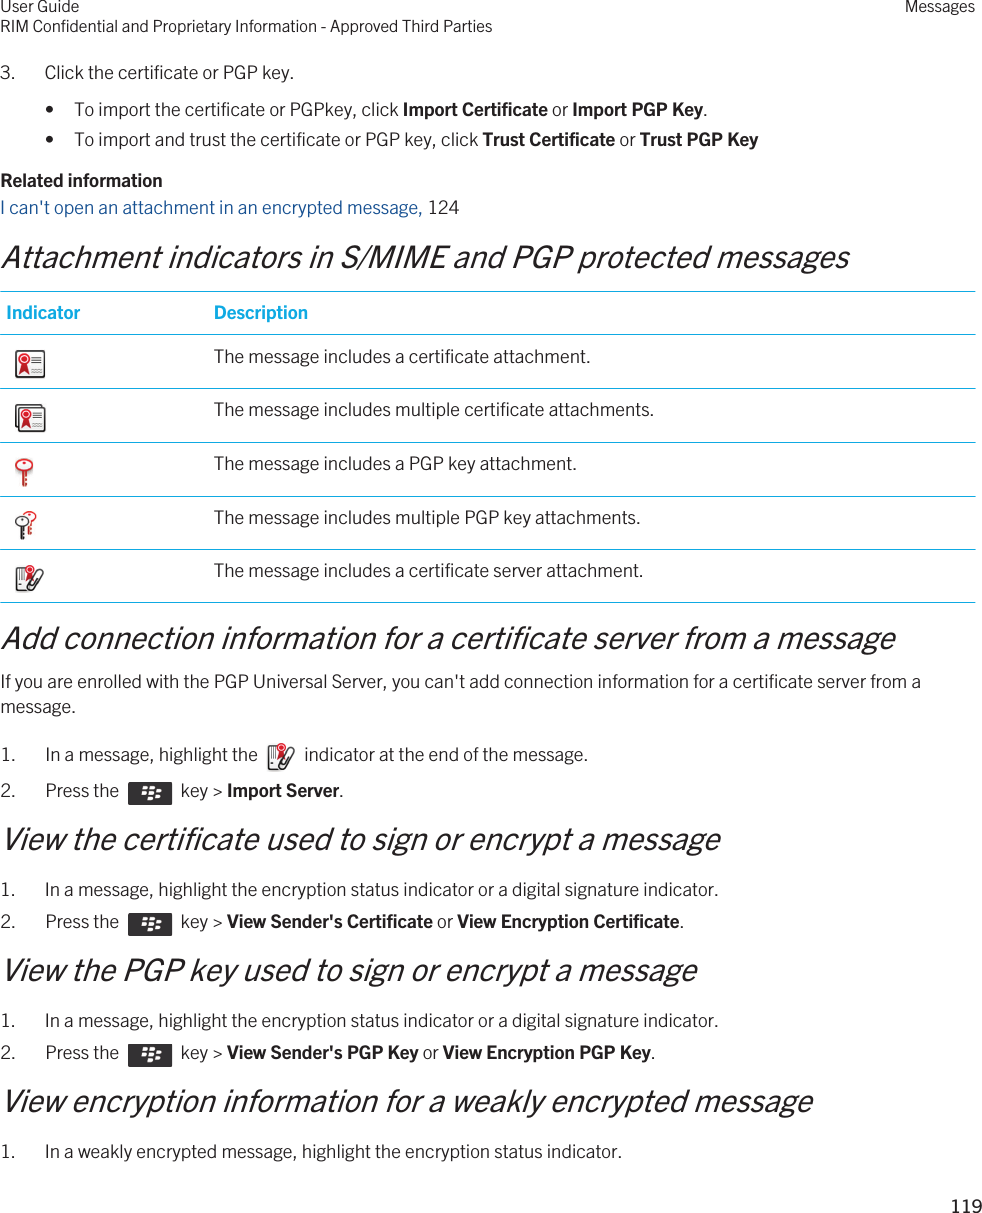 3. Click the certificate or PGP key.• To import the certificate or PGPkey, click Import Certificate or Import PGP Key.• To import and trust the certificate or PGP key, click Trust Certificate or Trust PGP KeyRelated informationI can&apos;t open an attachment in an encrypted message, 124Attachment indicators in S/MIME and PGP protected messagesIndicator Description The message includes a certificate attachment. The message includes multiple certificate attachments. The message includes a PGP key attachment. The message includes multiple PGP key attachments. The message includes a certificate server attachment.Add connection information for a certificate server from a messageIf you are enrolled with the PGP Universal Server, you can&apos;t add connection information for a certificate server from a message.1.  In a message, highlight the    indicator at the end of the message. 2.  Press the    key &gt; Import Server. View the certificate used to sign or encrypt a message1. In a message, highlight the encryption status indicator or a digital signature indicator.2.  Press the    key &gt; View Sender&apos;s Certificate or View Encryption Certificate. View the PGP key used to sign or encrypt a message1. In a message, highlight the encryption status indicator or a digital signature indicator.2.  Press the    key &gt; View Sender&apos;s PGP Key or View Encryption PGP Key. View encryption information for a weakly encrypted message1. In a weakly encrypted message, highlight the encryption status indicator.User GuideRIM Confidential and Proprietary Information - Approved Third PartiesMessages119 